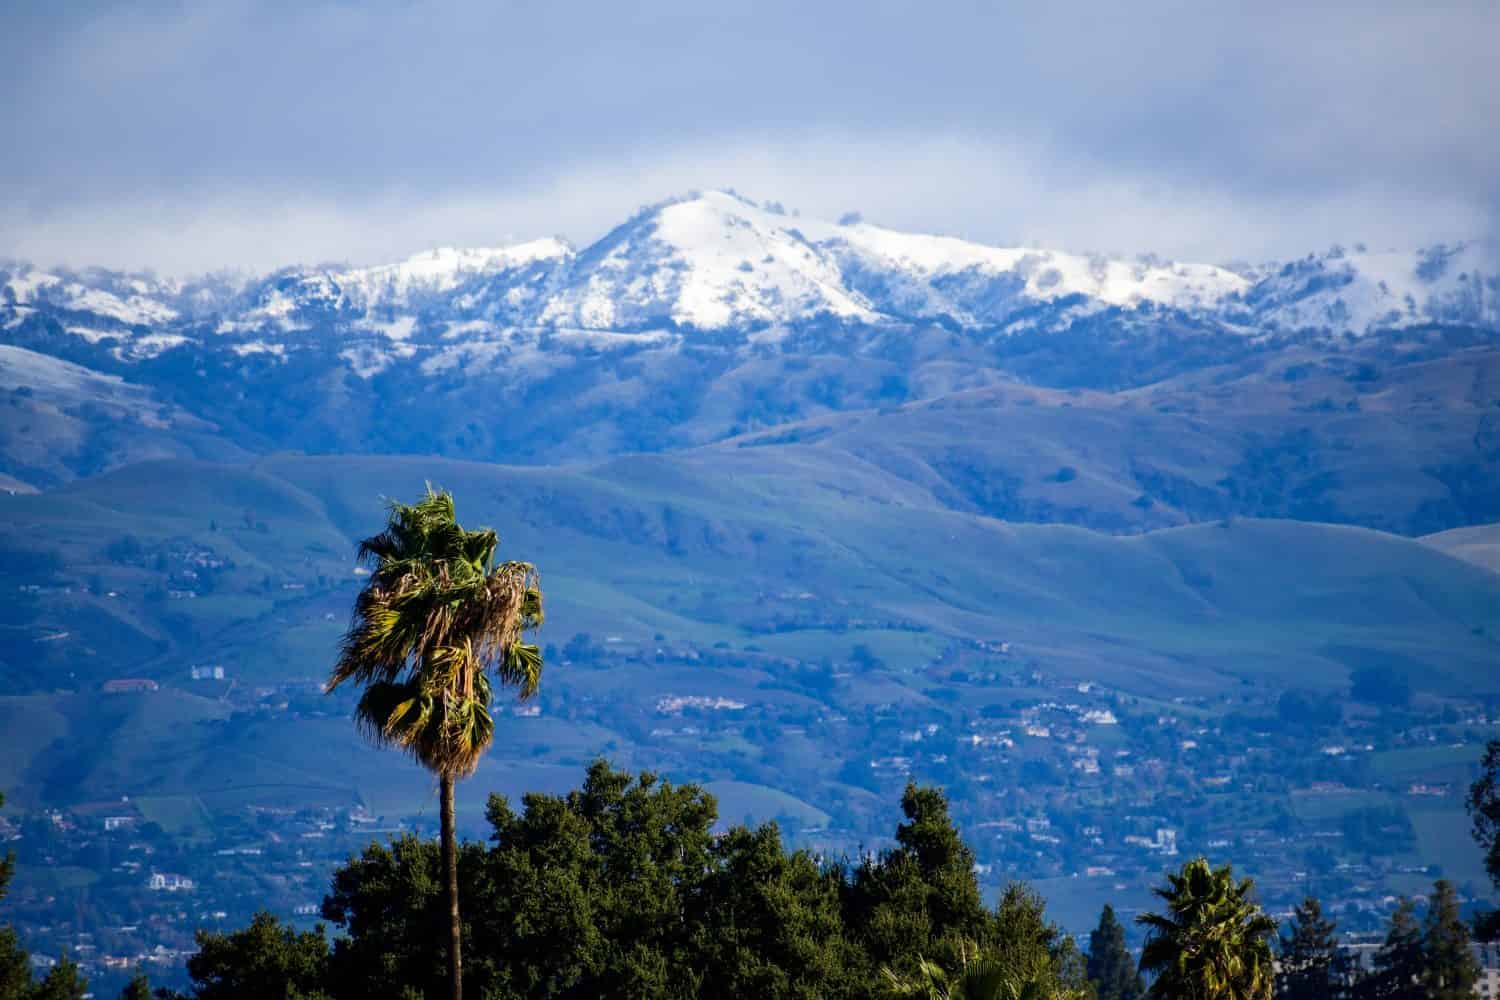 Lonely palm tree in front of blurred scenic view of snow covered San Francisco Bay Area peaks of Diablo mountain range above residential area of San Jose, California